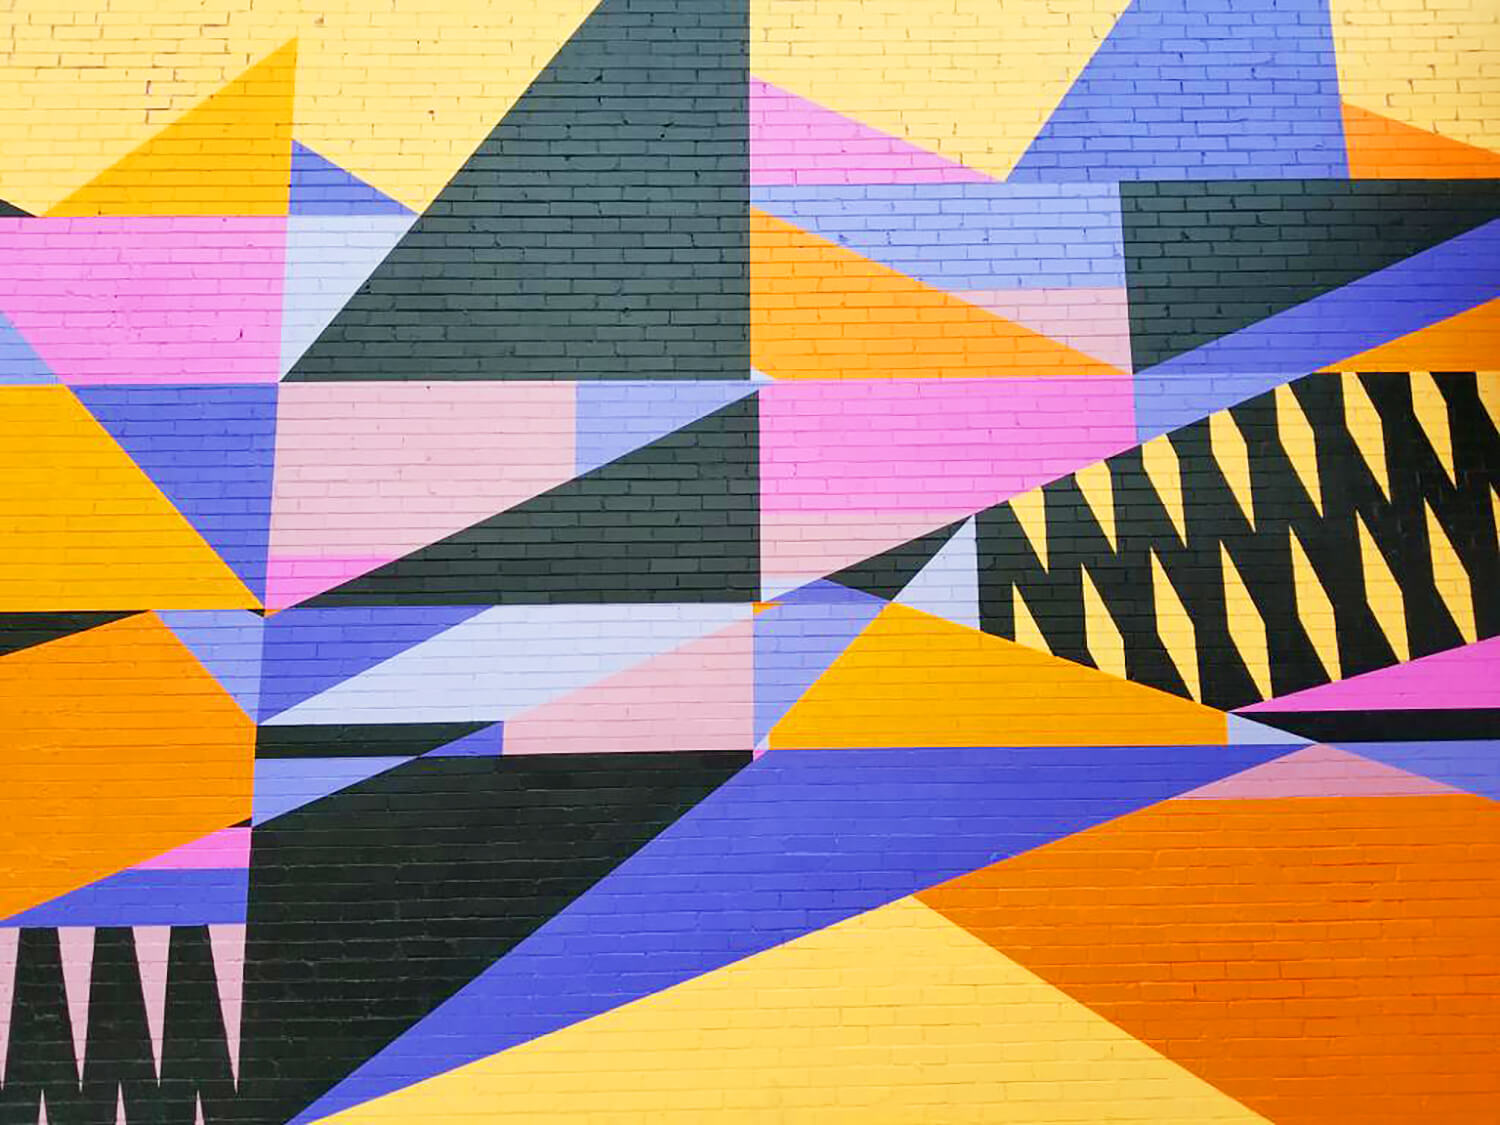 Instagrammable Walls of Calgary - Rhys Douglas Farrell Abstract Wall